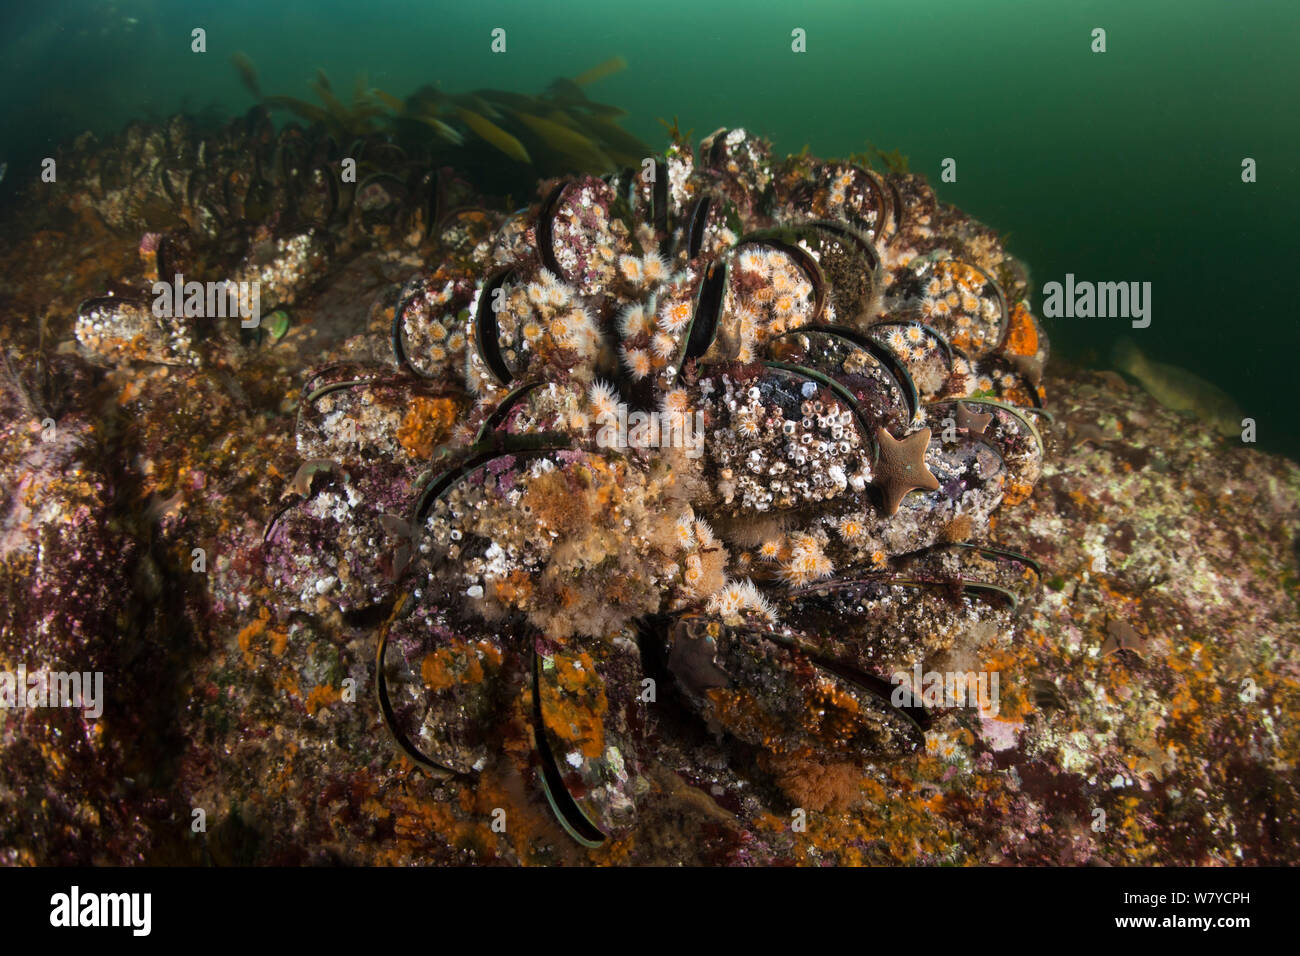 Green-lipped mussels (Perna canaliculus) covered in anemones, barnacles and a starfish in Breaksea Sound, Fiordland National Park, New Zealand. Stock Photo